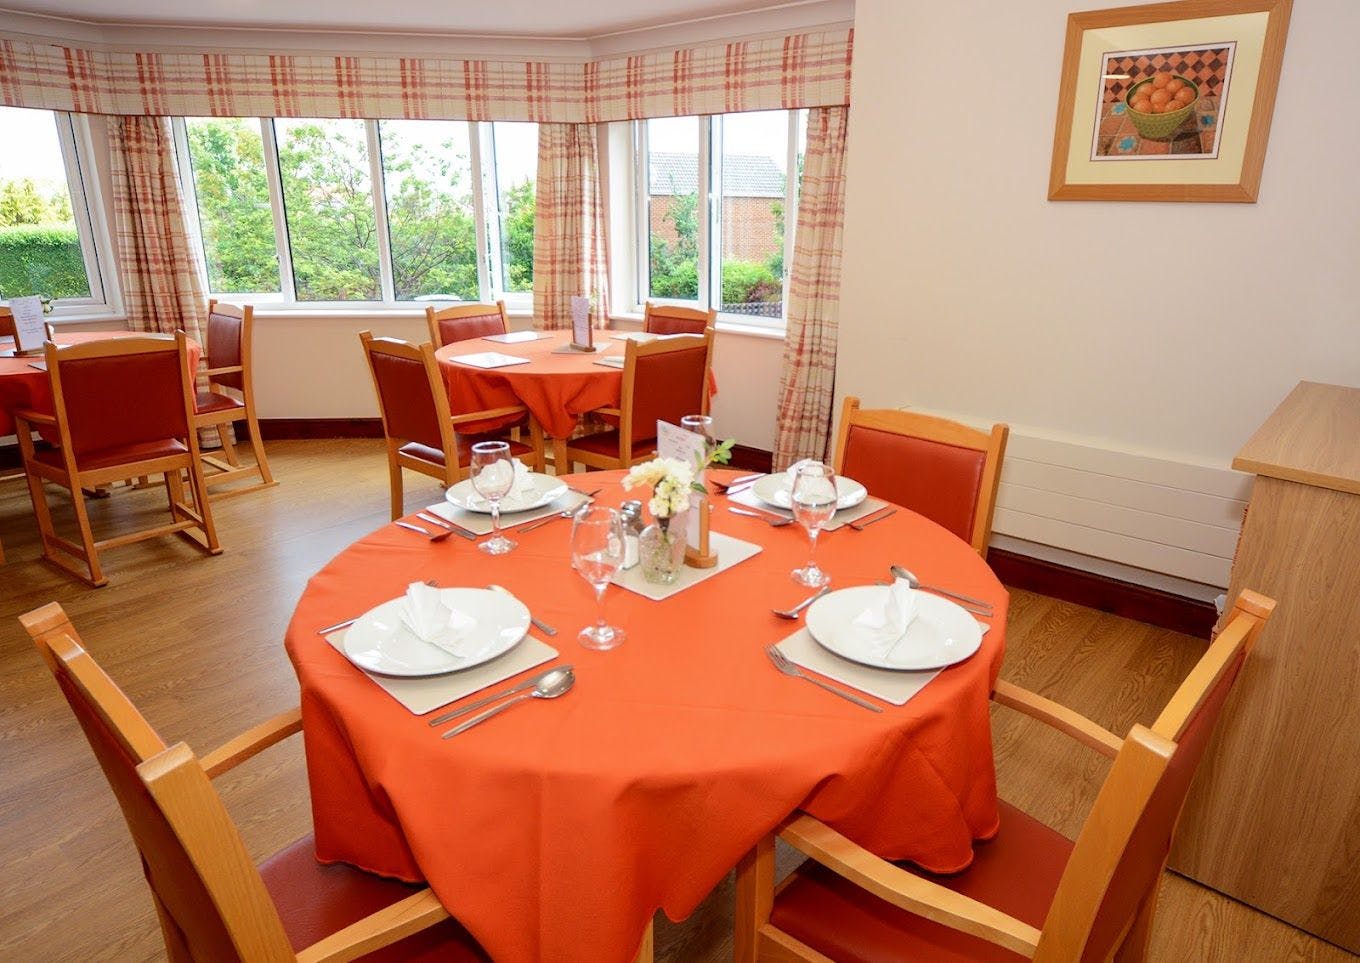 Dining room of Talbot View care home in Bournemouth, Hampshire